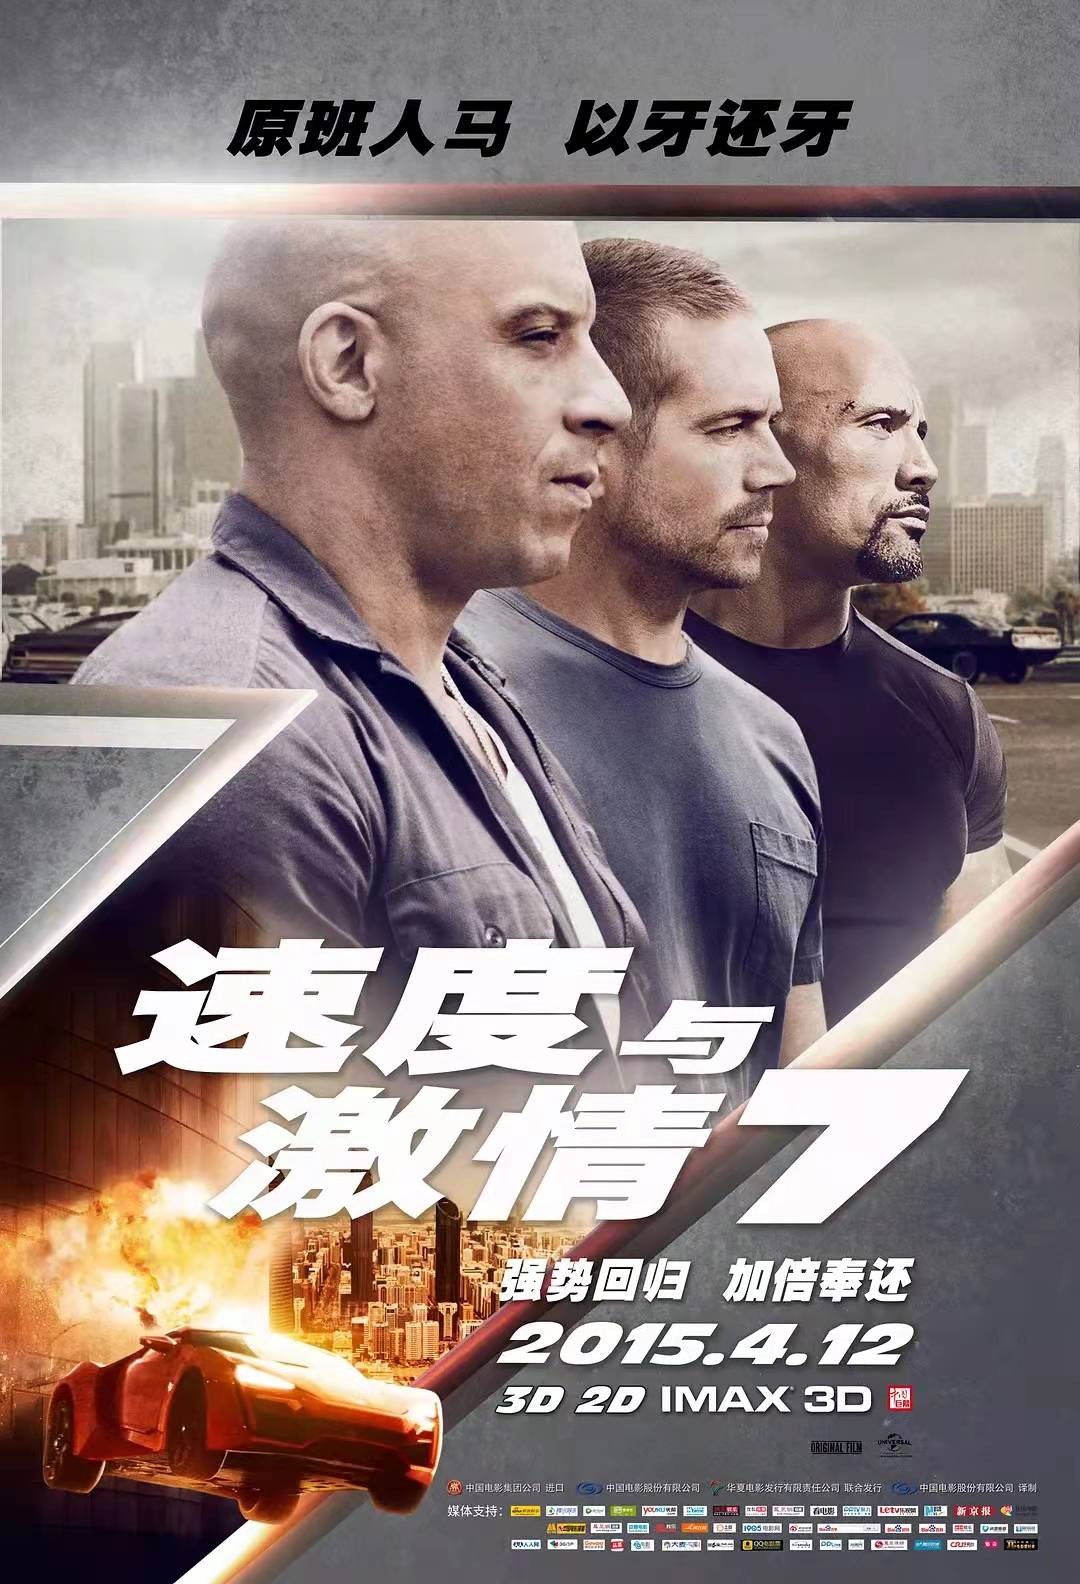 Fast & Furious 10' Moves Release Date to May 2023